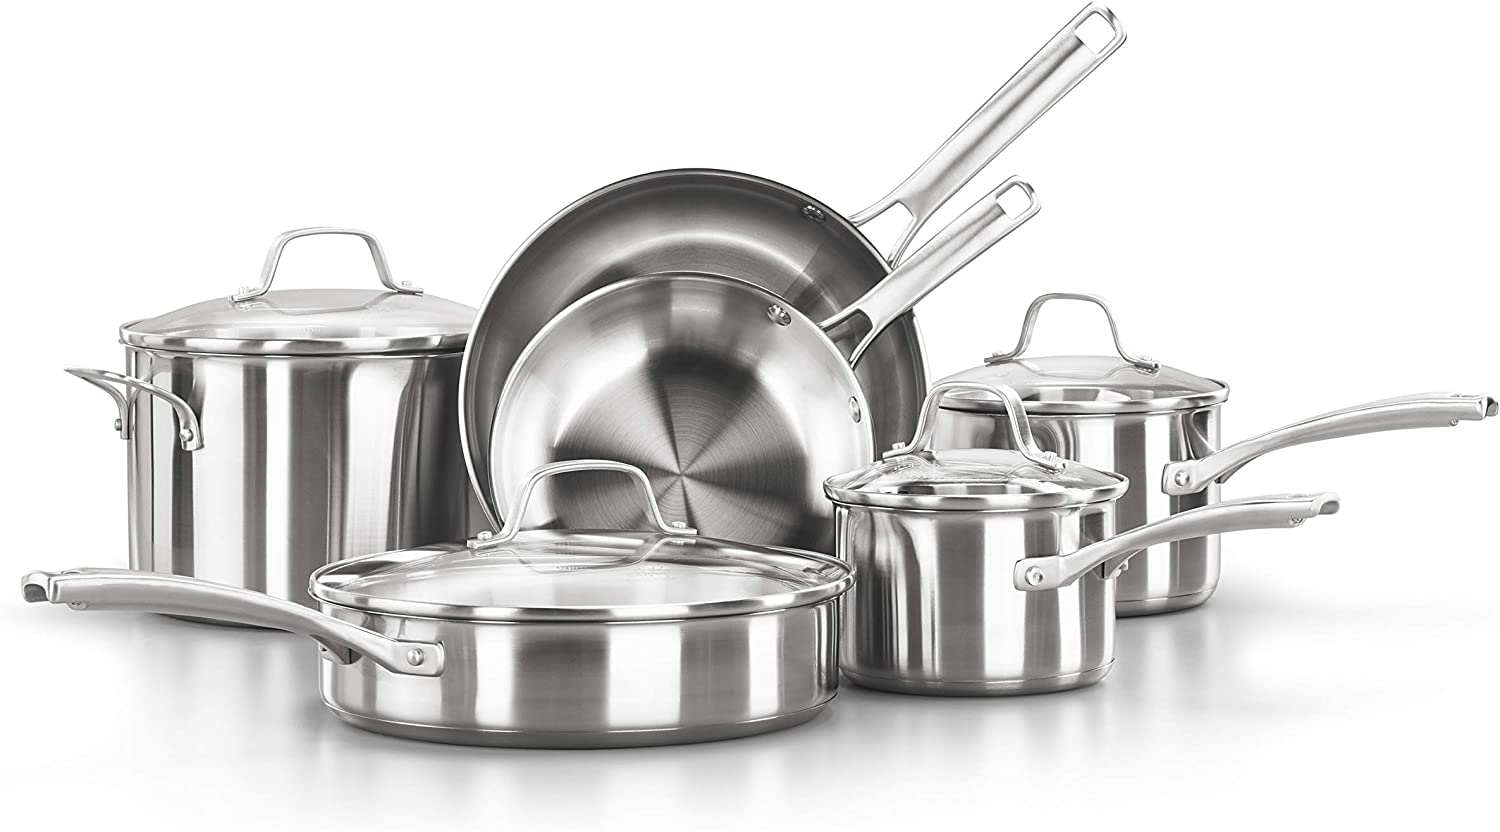 Calphalon Impact Bonded Stainless Steel Cookware, 10-Piece